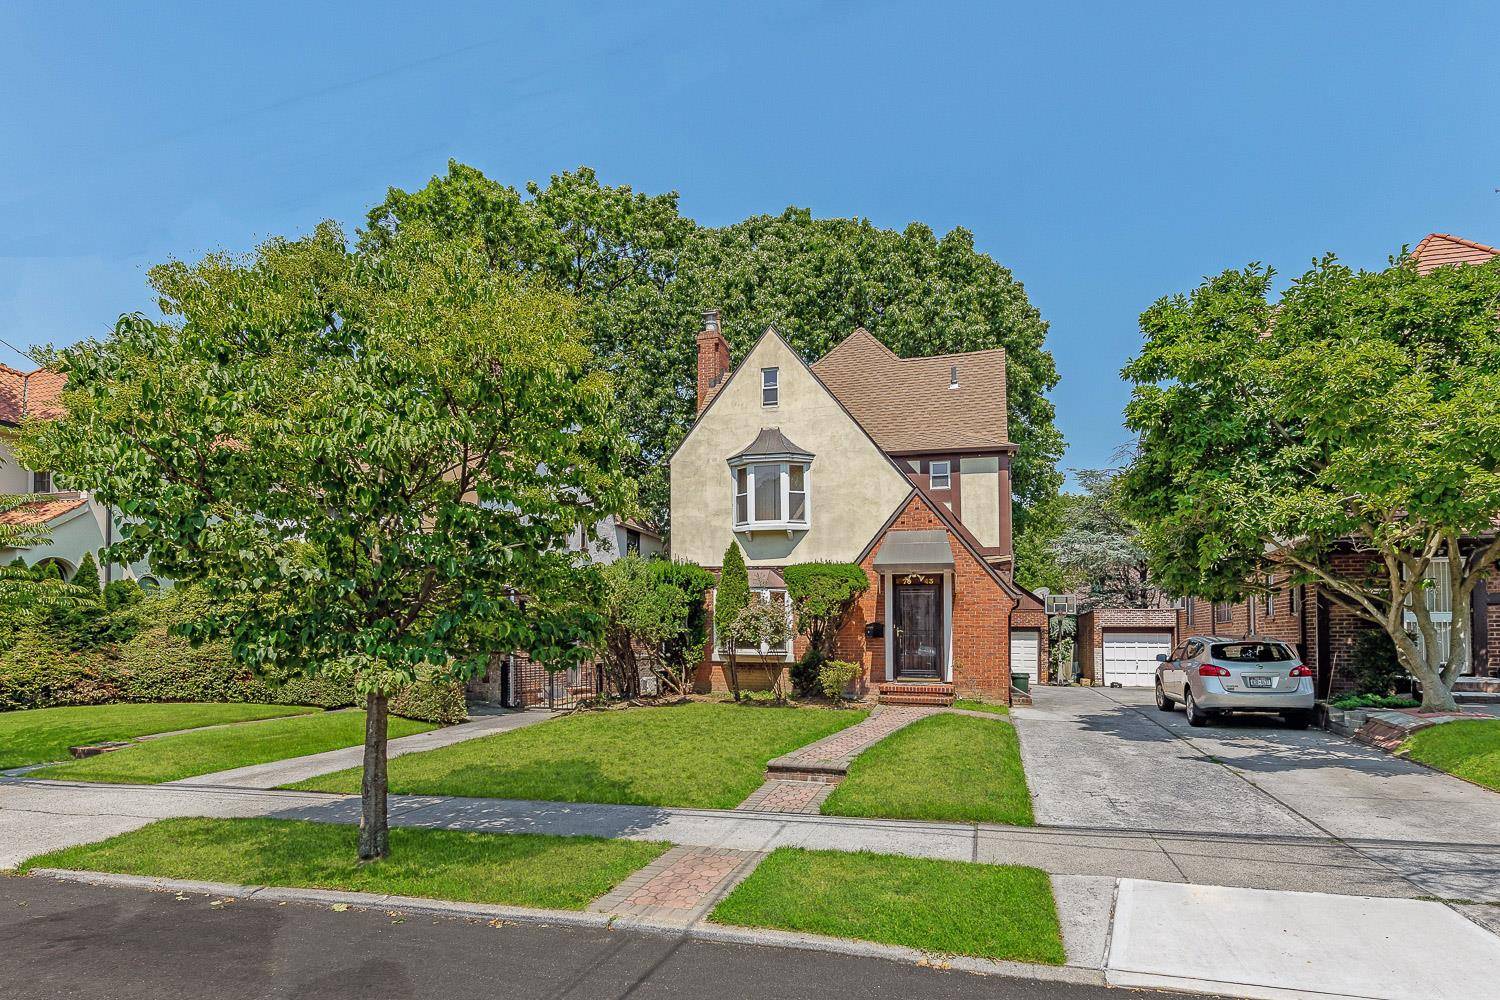 A Rare 2 Story detached Tudor home situated in the exclusive Van Court area of Forest Hills.